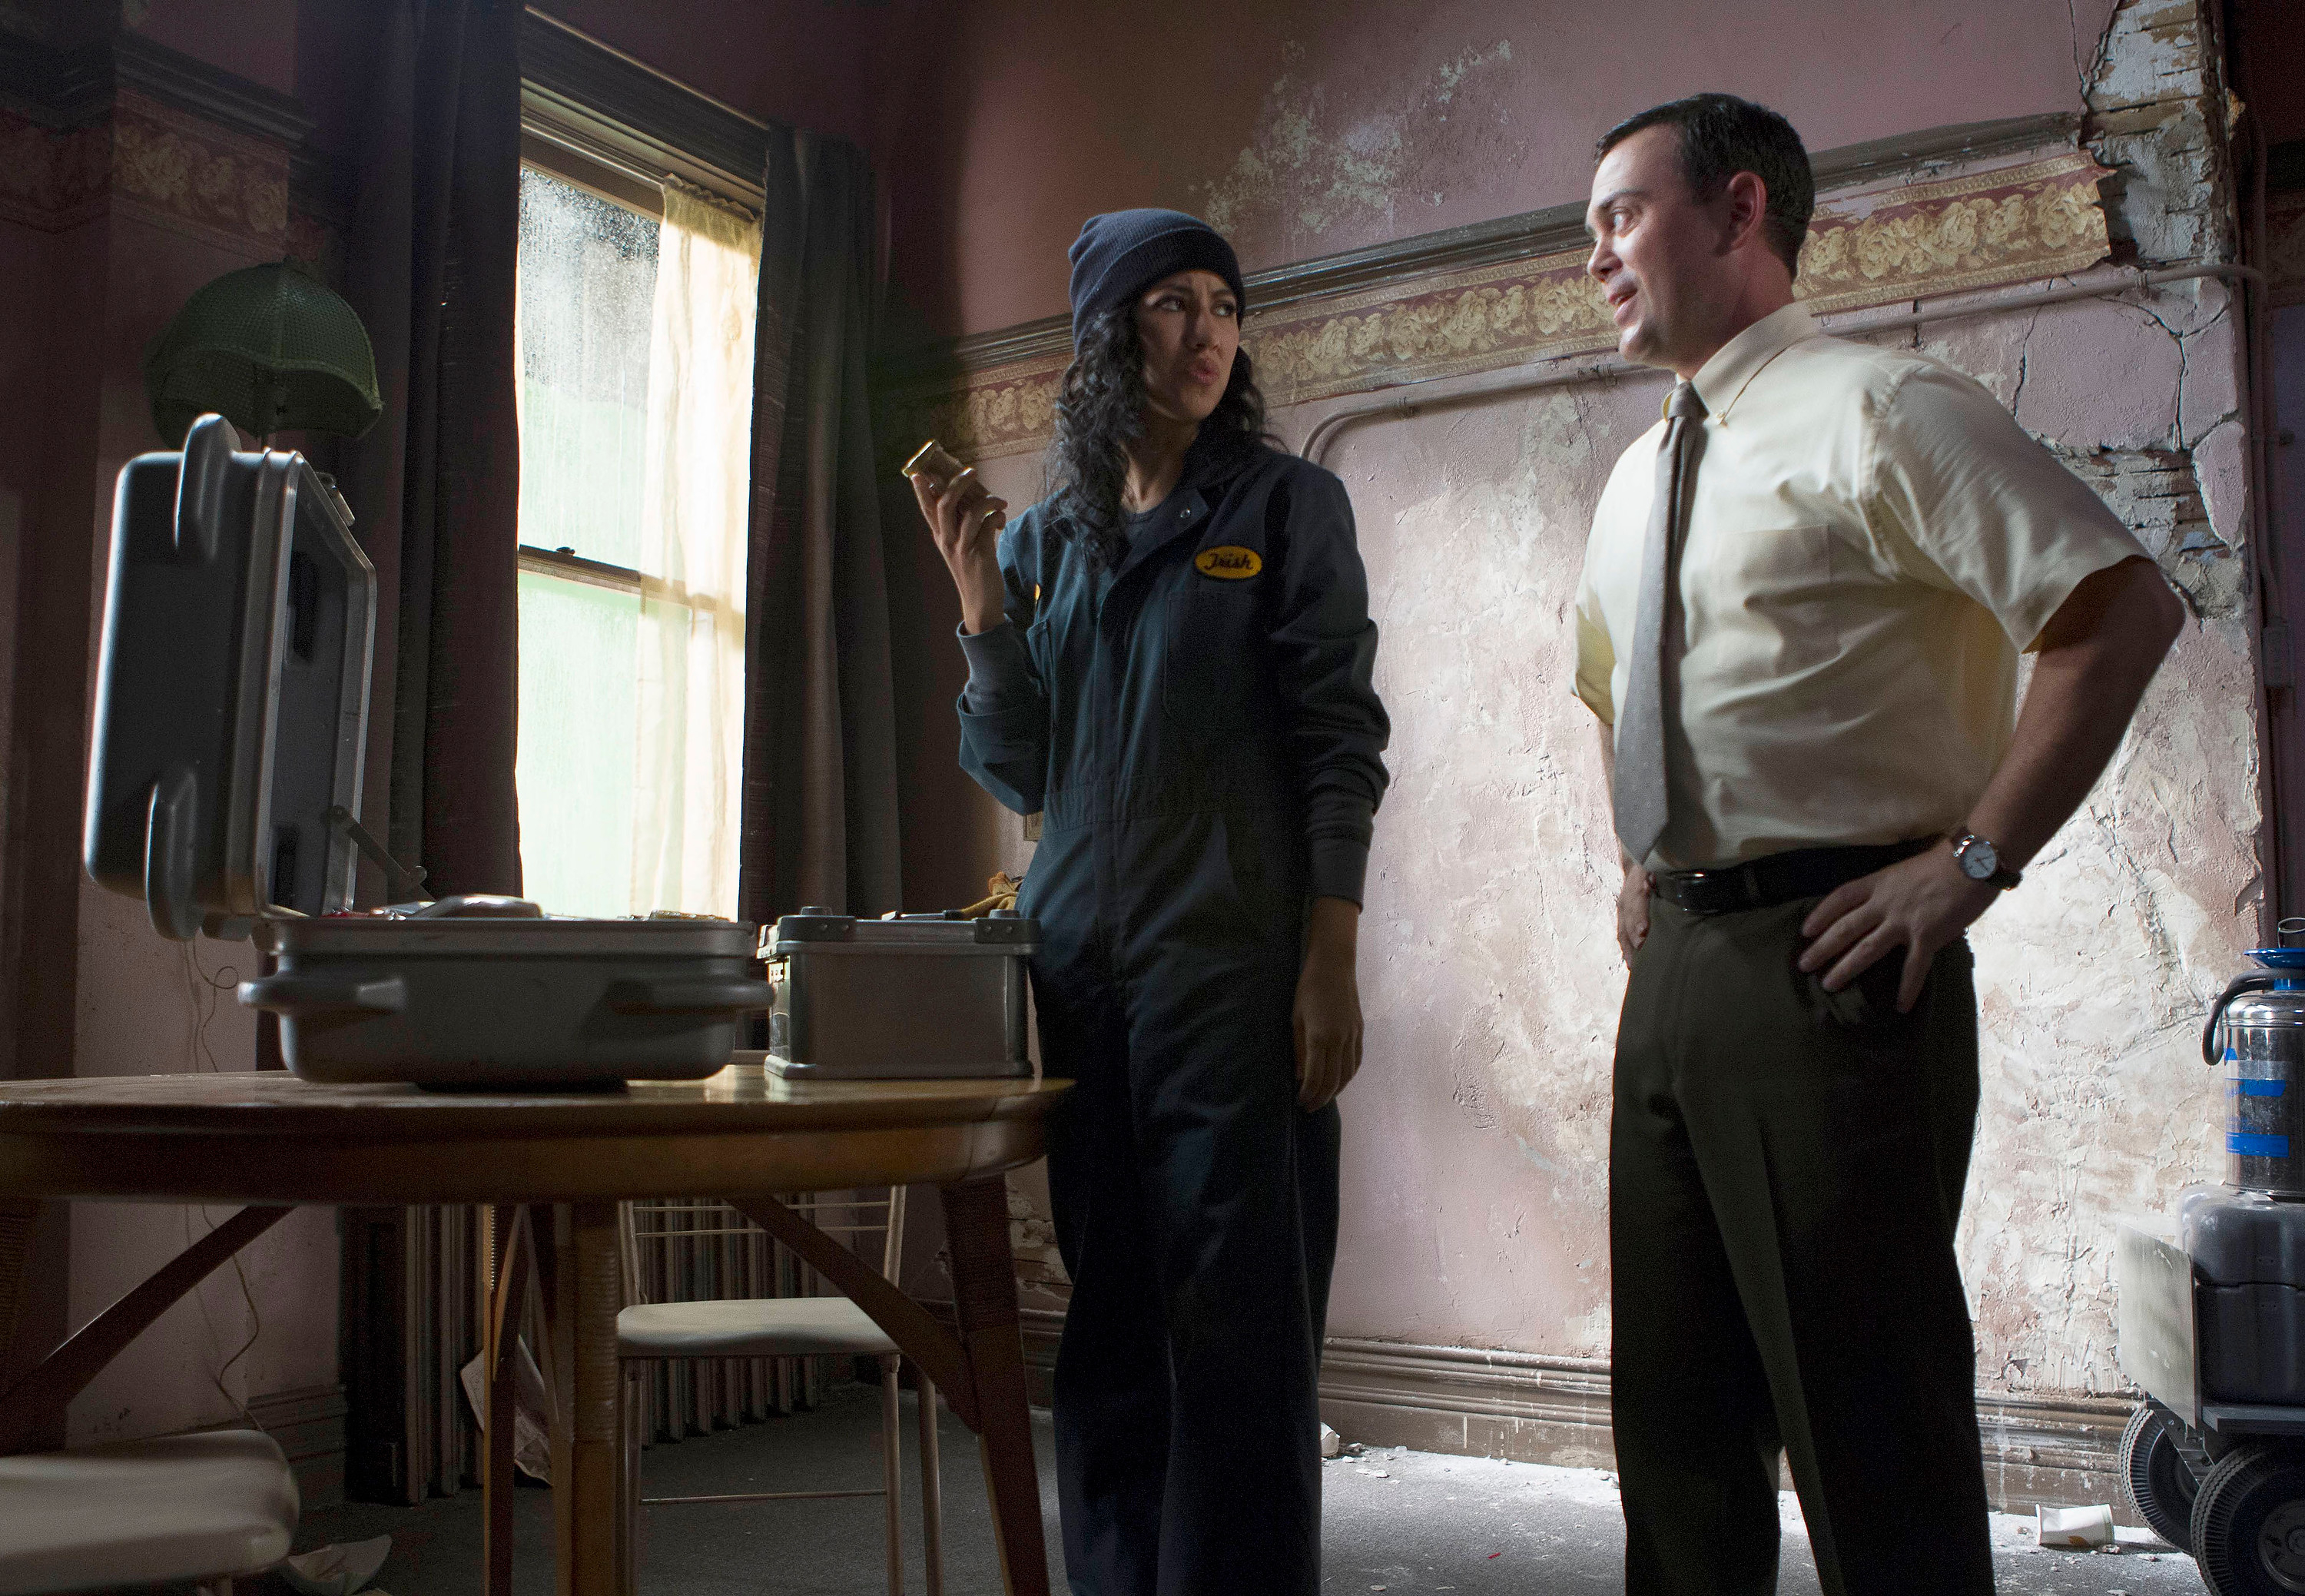 Stephanie Beatriz and Joe Lo Truglio stand near open briefcases in a decrepit room